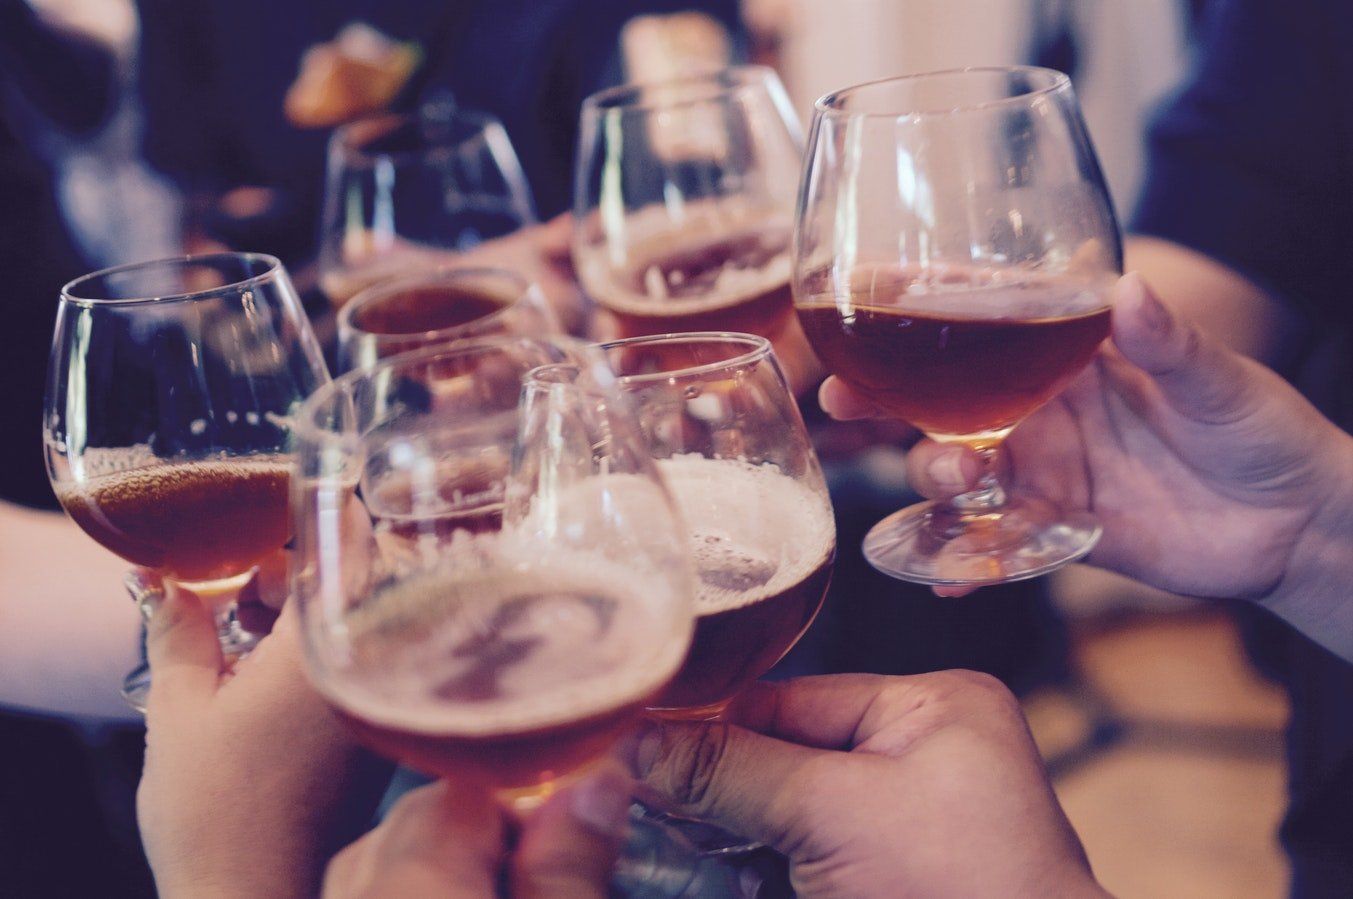 Group of glasses toasting with alcoholic beverage